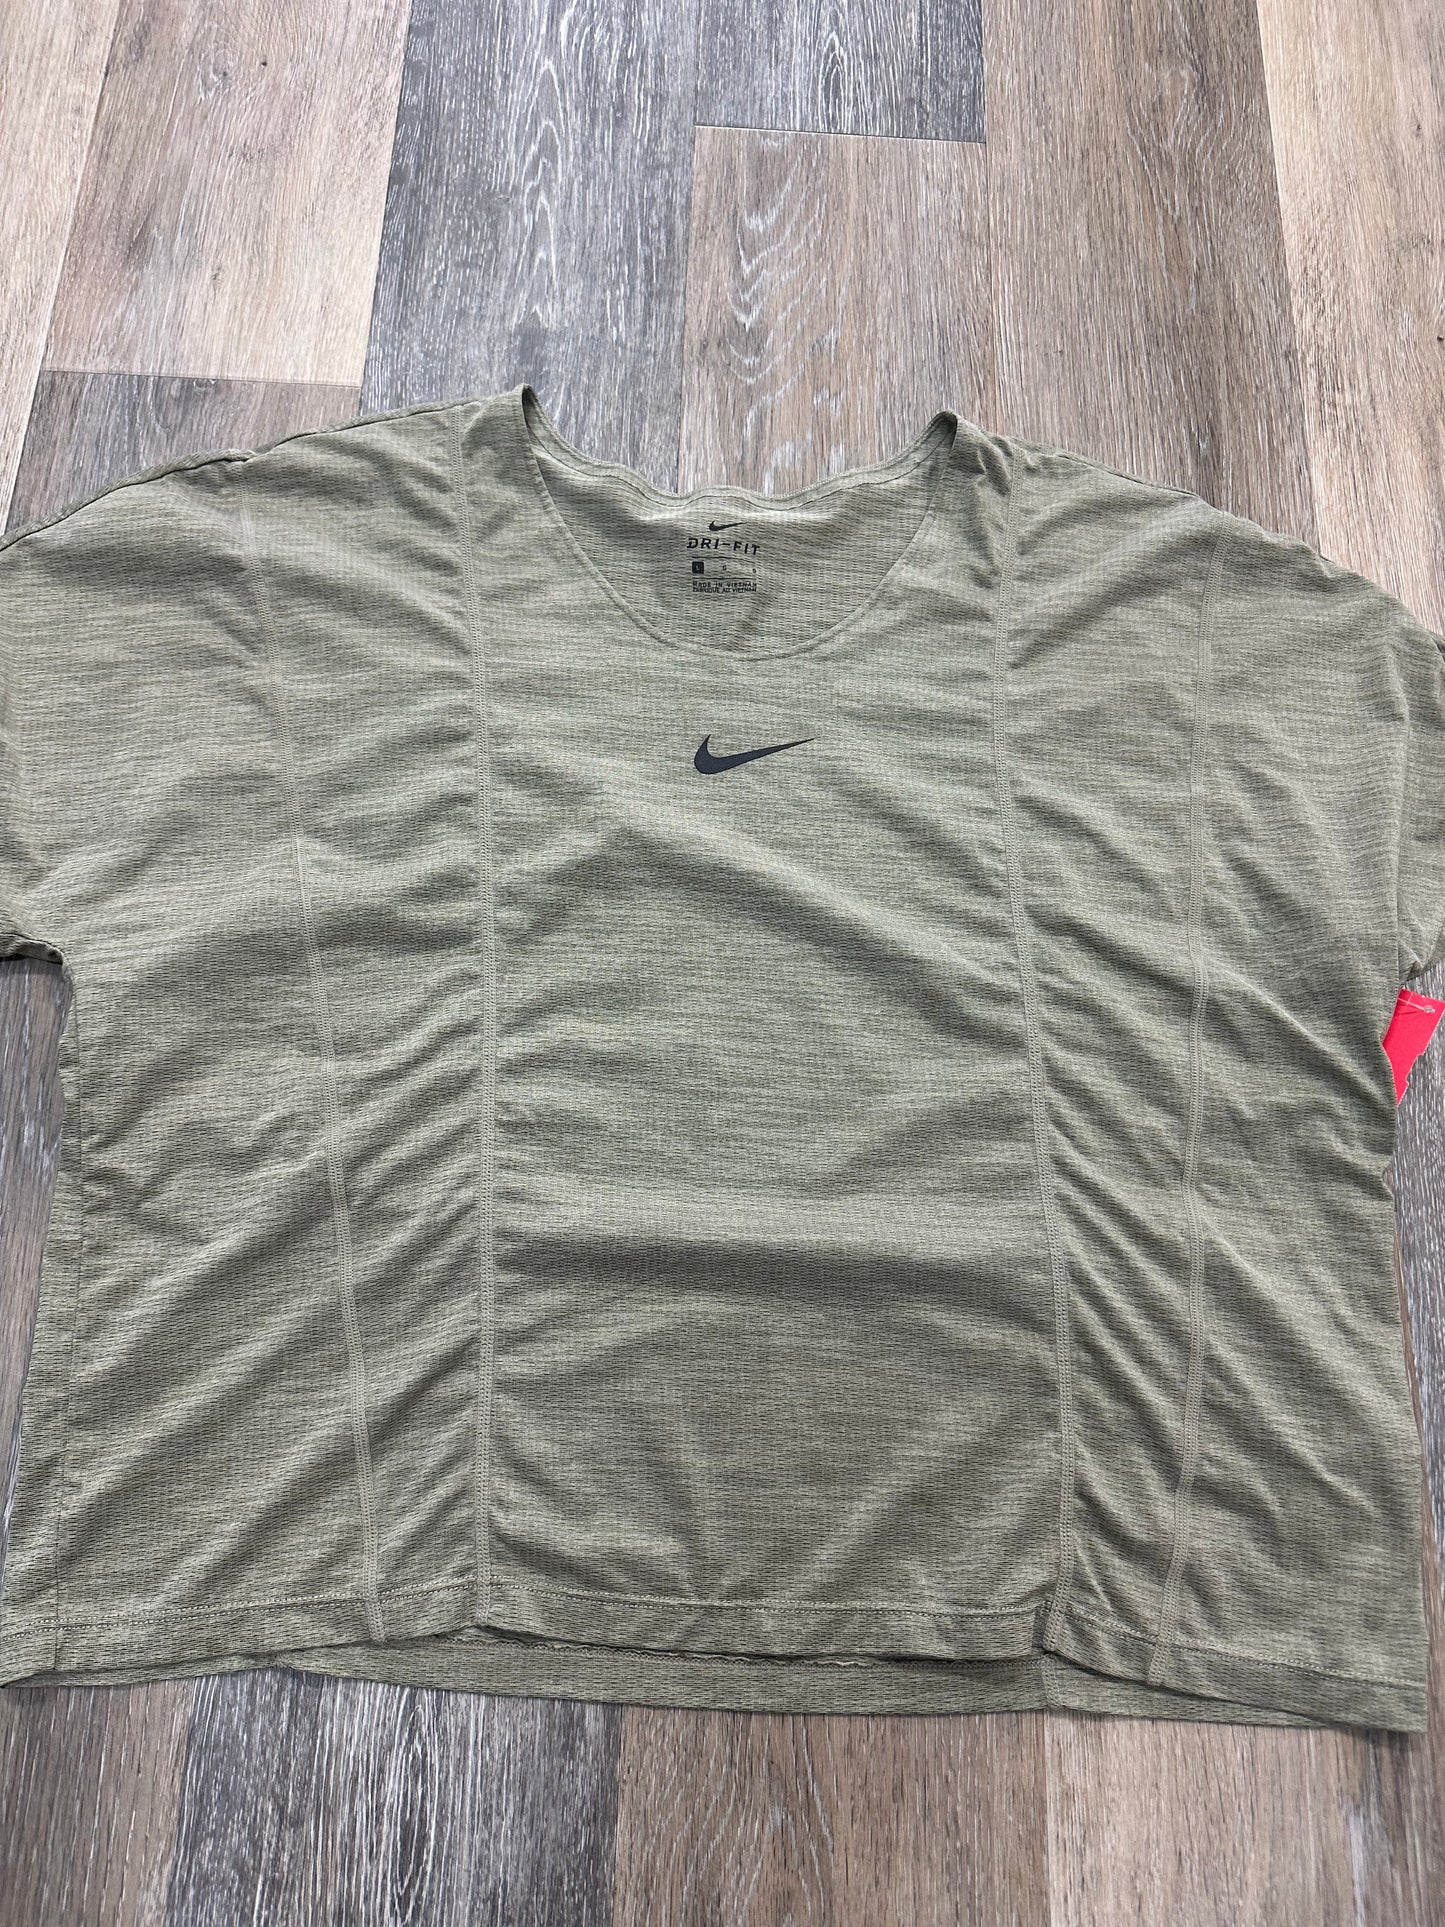 Green Athletic Top Short Sleeve Nike Apparel, Size L